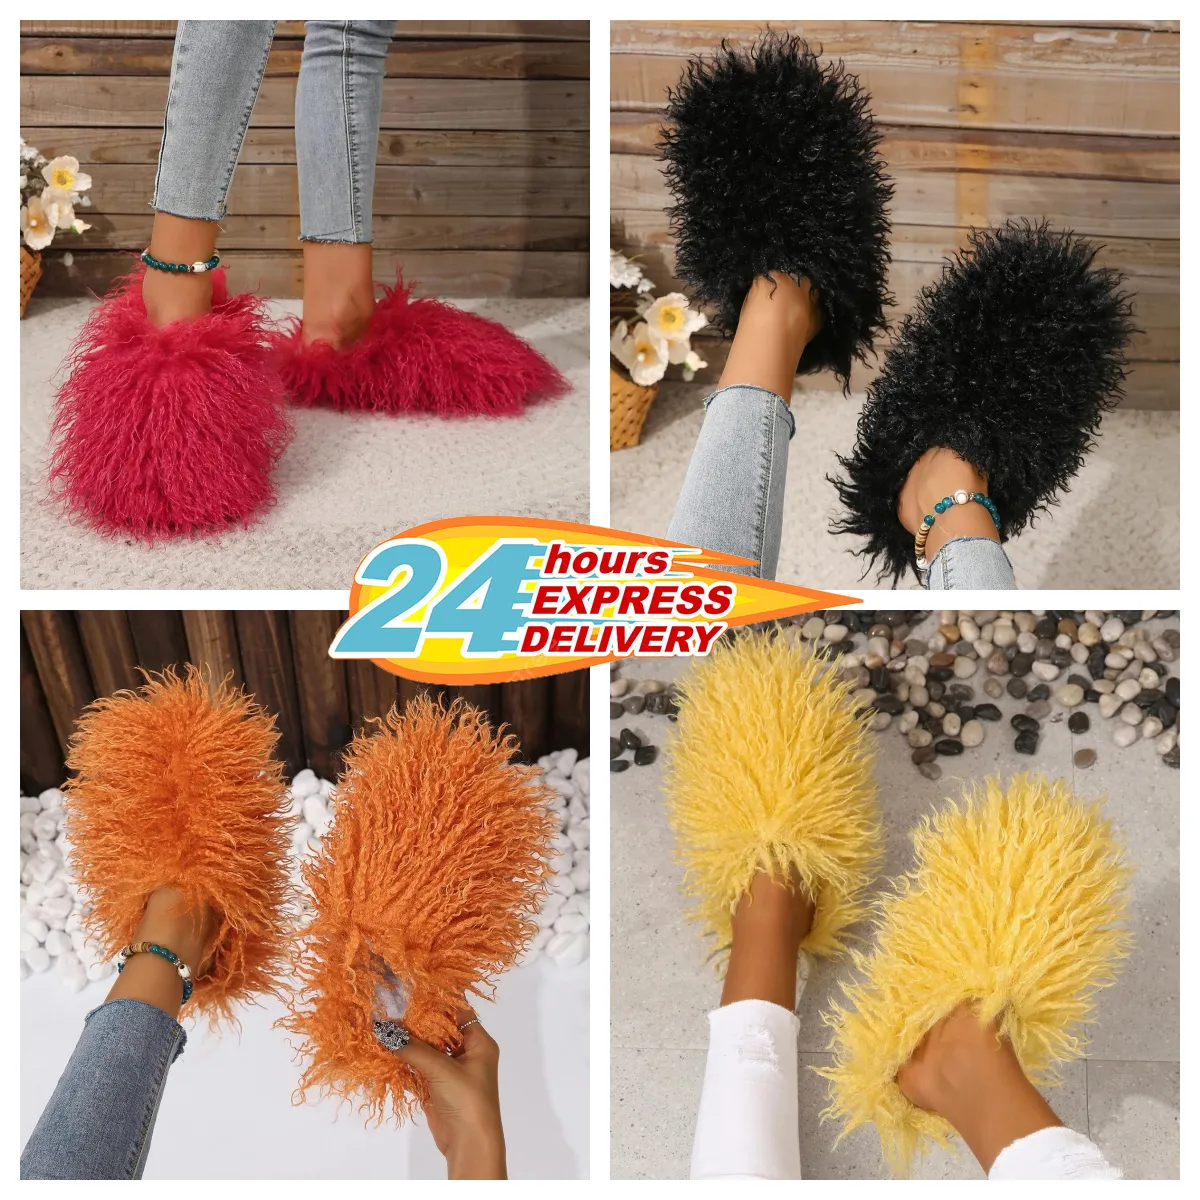 Slippers External Wear GAI Soft Bottom Home Women's Wholesale Flat Fur Fashion Autumn Furry Home Slippers maomao Ladies lovely cute Indoor Outdoor wear Eur 36-49